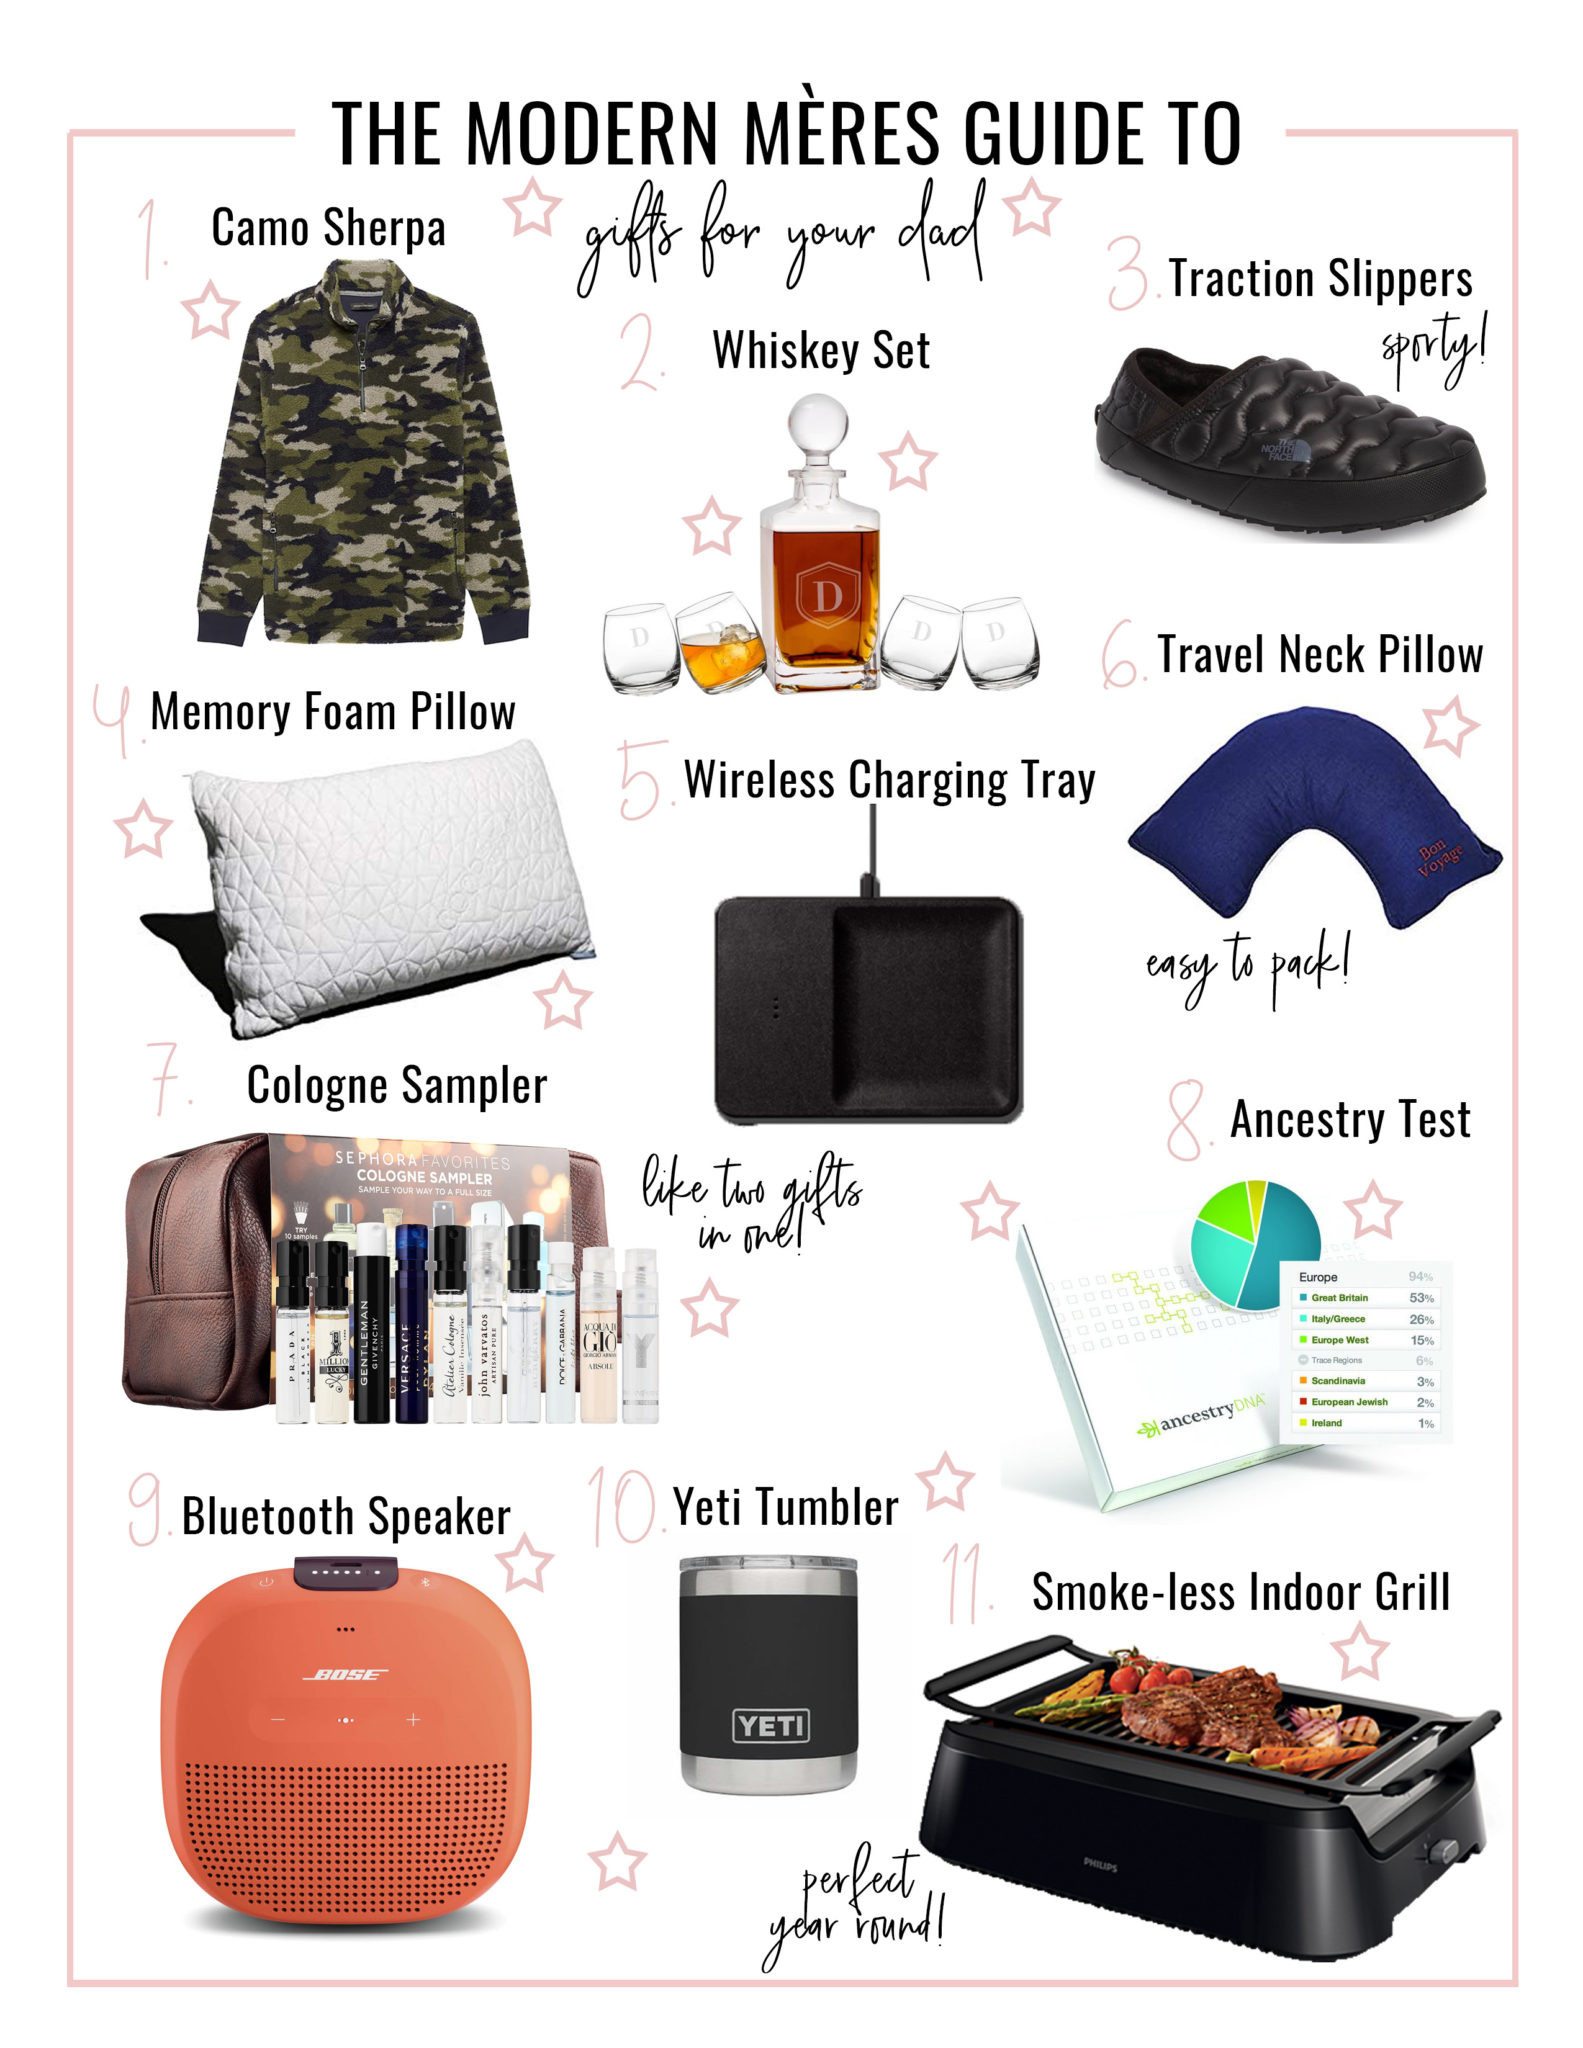 Holiday Gift Ideas For Dad
 Christmas t ideas for your dad